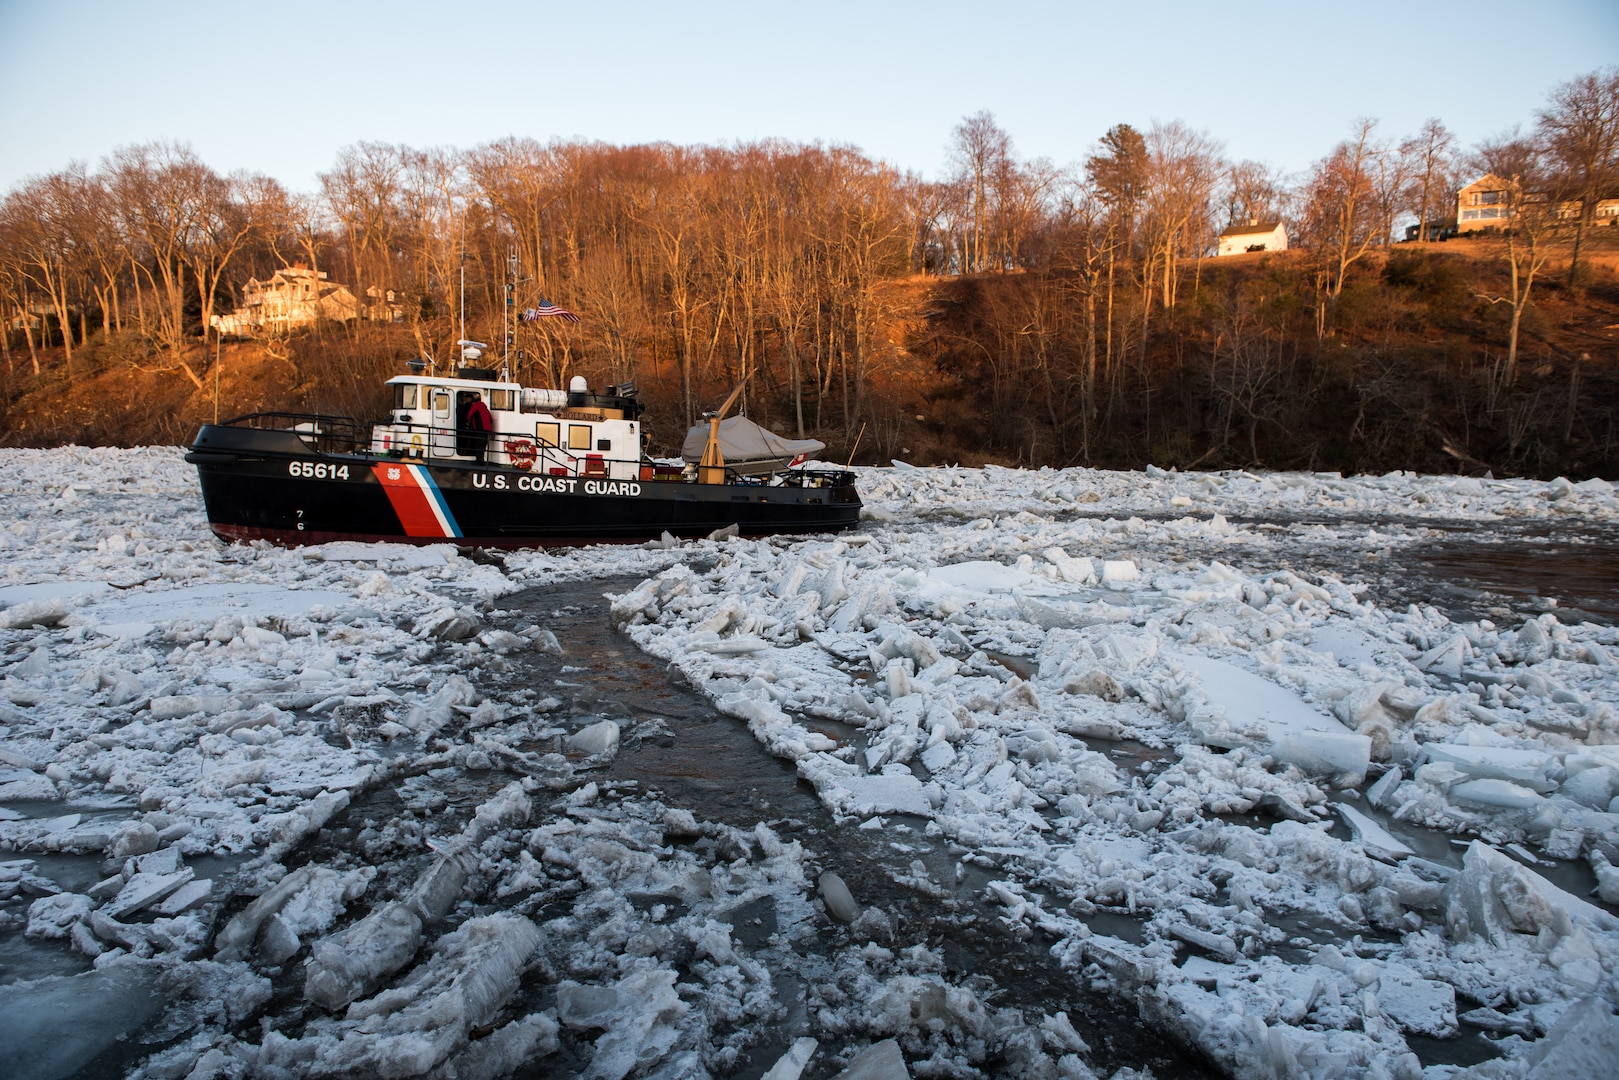 U.S. Coast Guard Cutter Bollard, a 65-foot Small Harbor Tug, transits on the ice-covered Connecticut River near Essex, Connecticut, Jan. 18, 2018. The Bollard is being used on the Connecticut River to break apart ice jams causing floods along the Connecticut River in support of Operation - Reliable Energy for Northeast Winters (RENEW). (U.S. Coast Guard photo by Petty Officer 3rd Class Frank Iannazzo-Simmons)